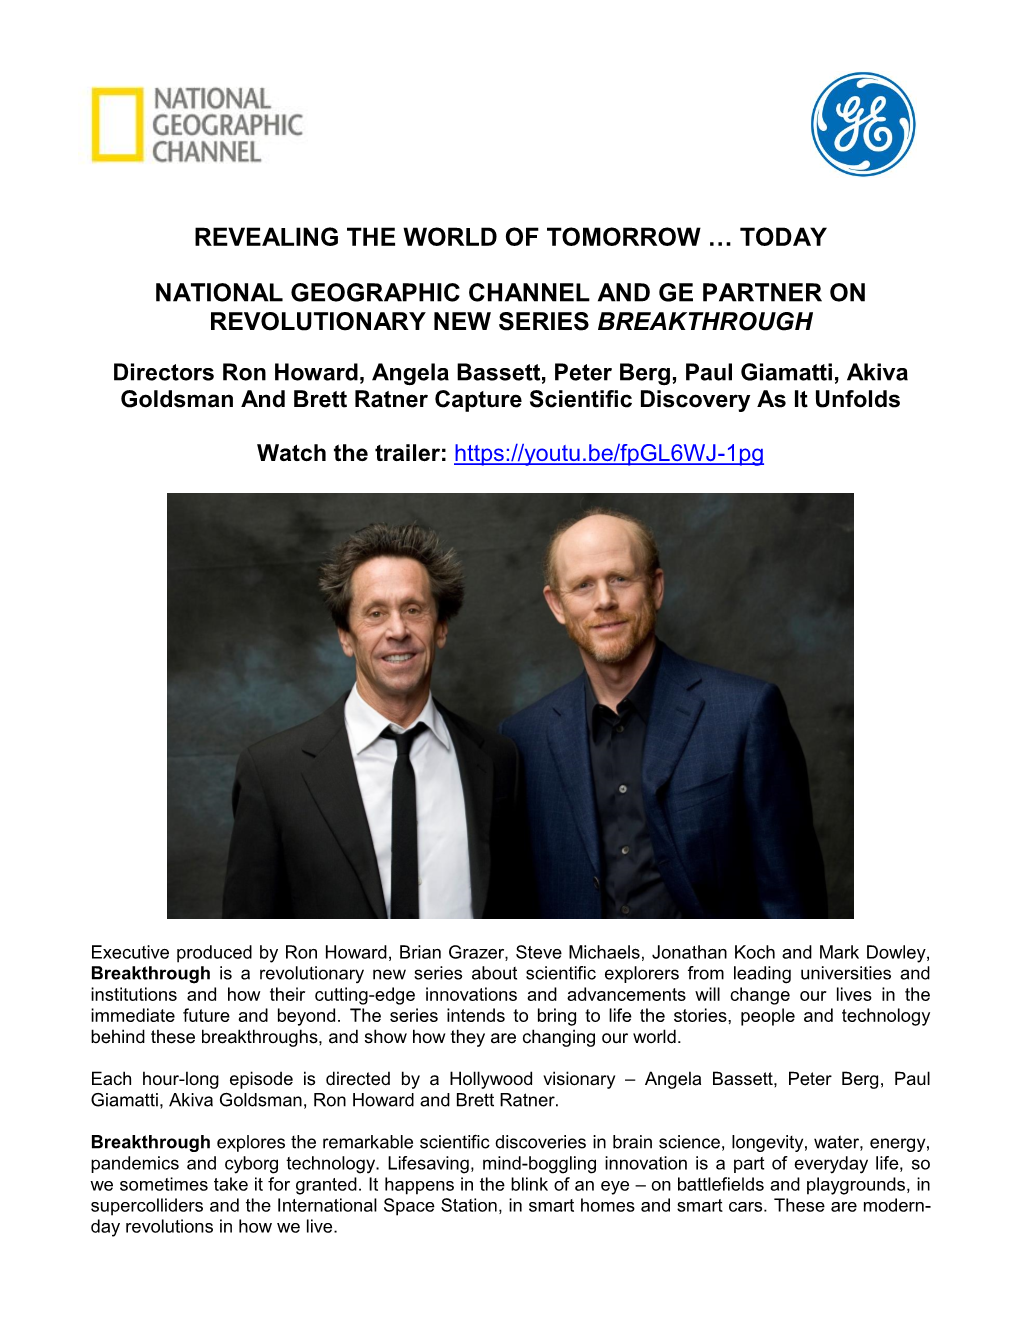 Today National Geographic Channel and Ge Partner On